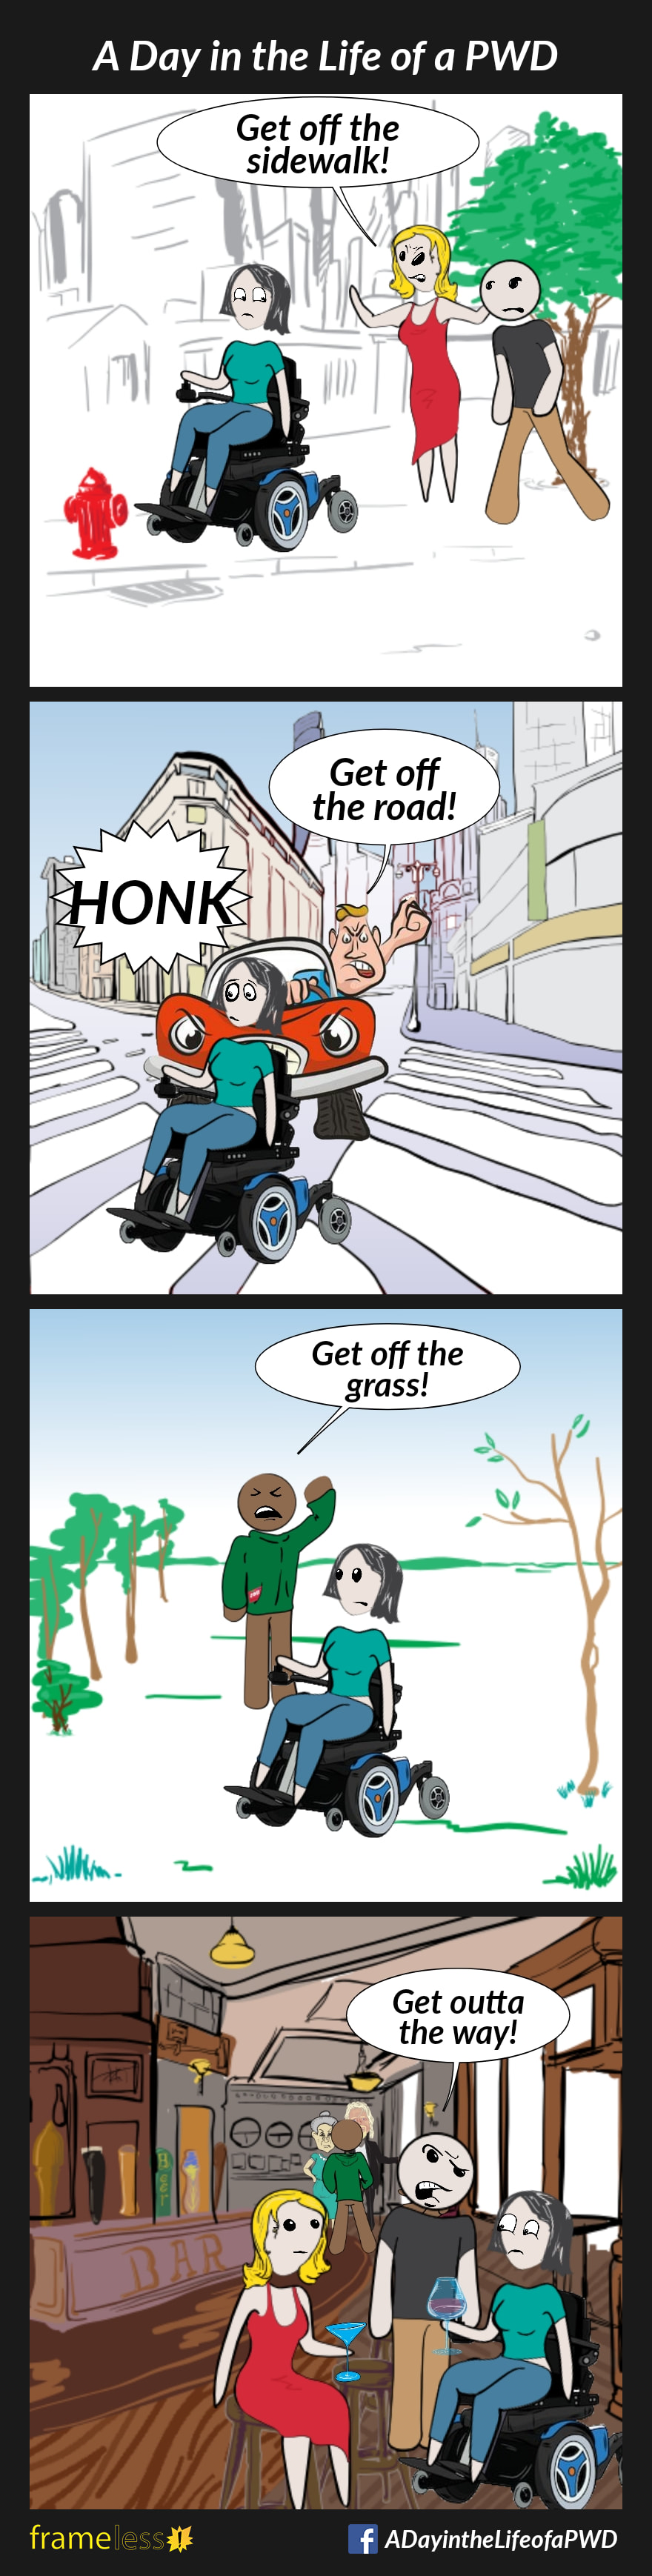 COMIC STRIP 
A Day in the Life of a PWD (Person With a Disability) 

Frame 1:
A woman in a power wheelchair is traveling down a sidewalk. She passes a wife and her husband.
WIFE: Get off the sidewalk!

Frame 2:
The woman is crossing a crosswalk in front of an impatient driver.
DRIVER: Get off the road!

Frame 3:
The woman is traveling through a park. She passes a man.
MAN: Get off the grass!

Frame 4:
The woman is in a bar, having a drink with a friend. A man is trying to get past her.
MAN: Get outta the way!
